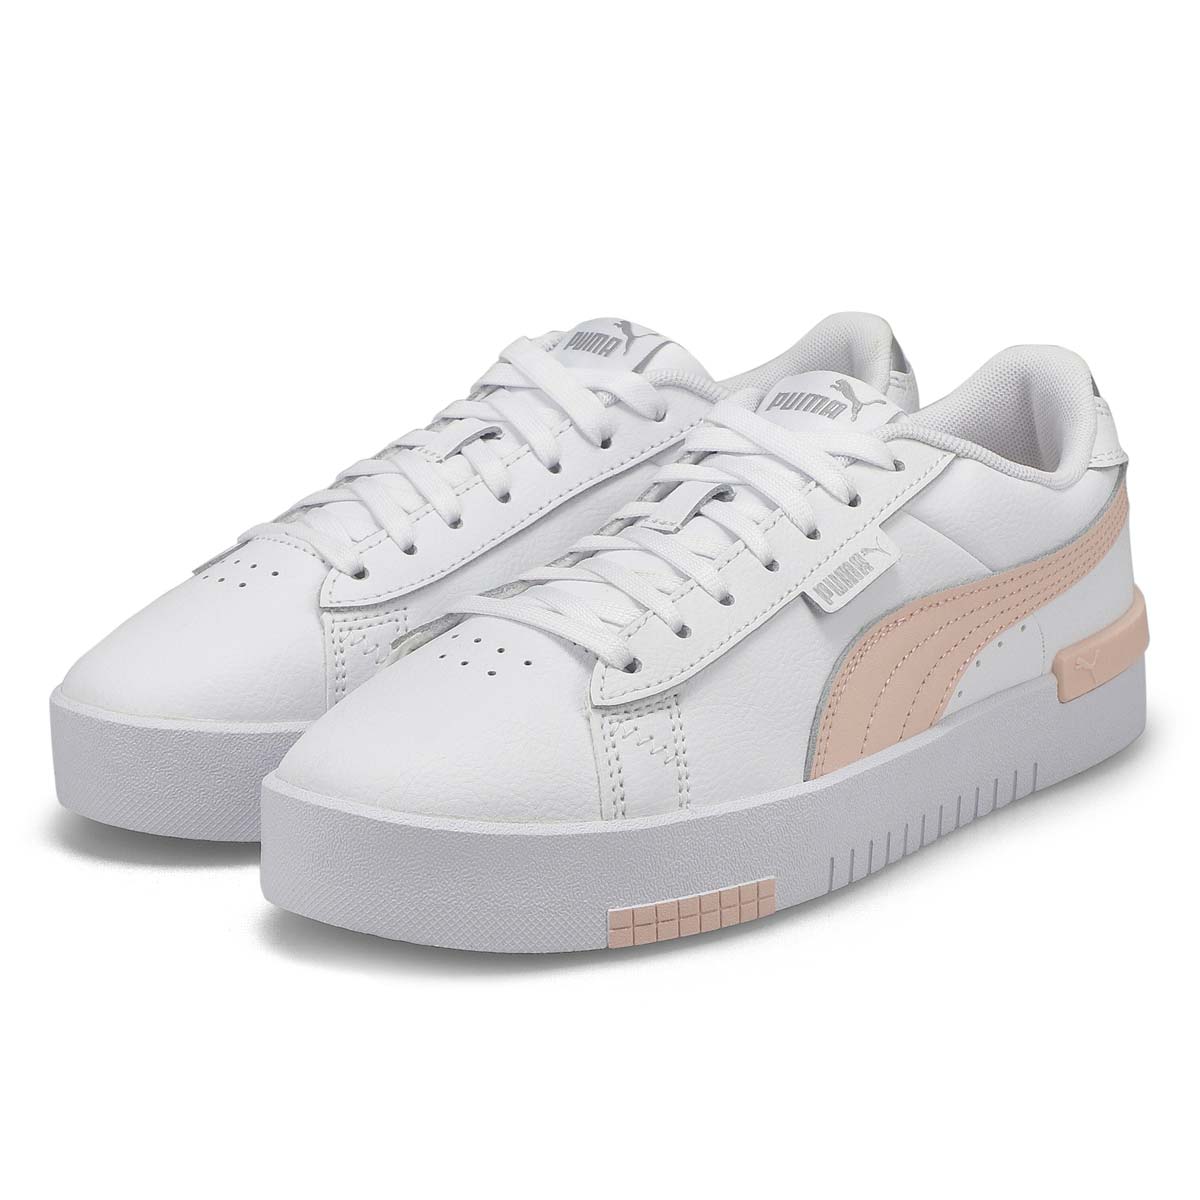 Lds Jada Renew Lace Up Snkr-White/Pink